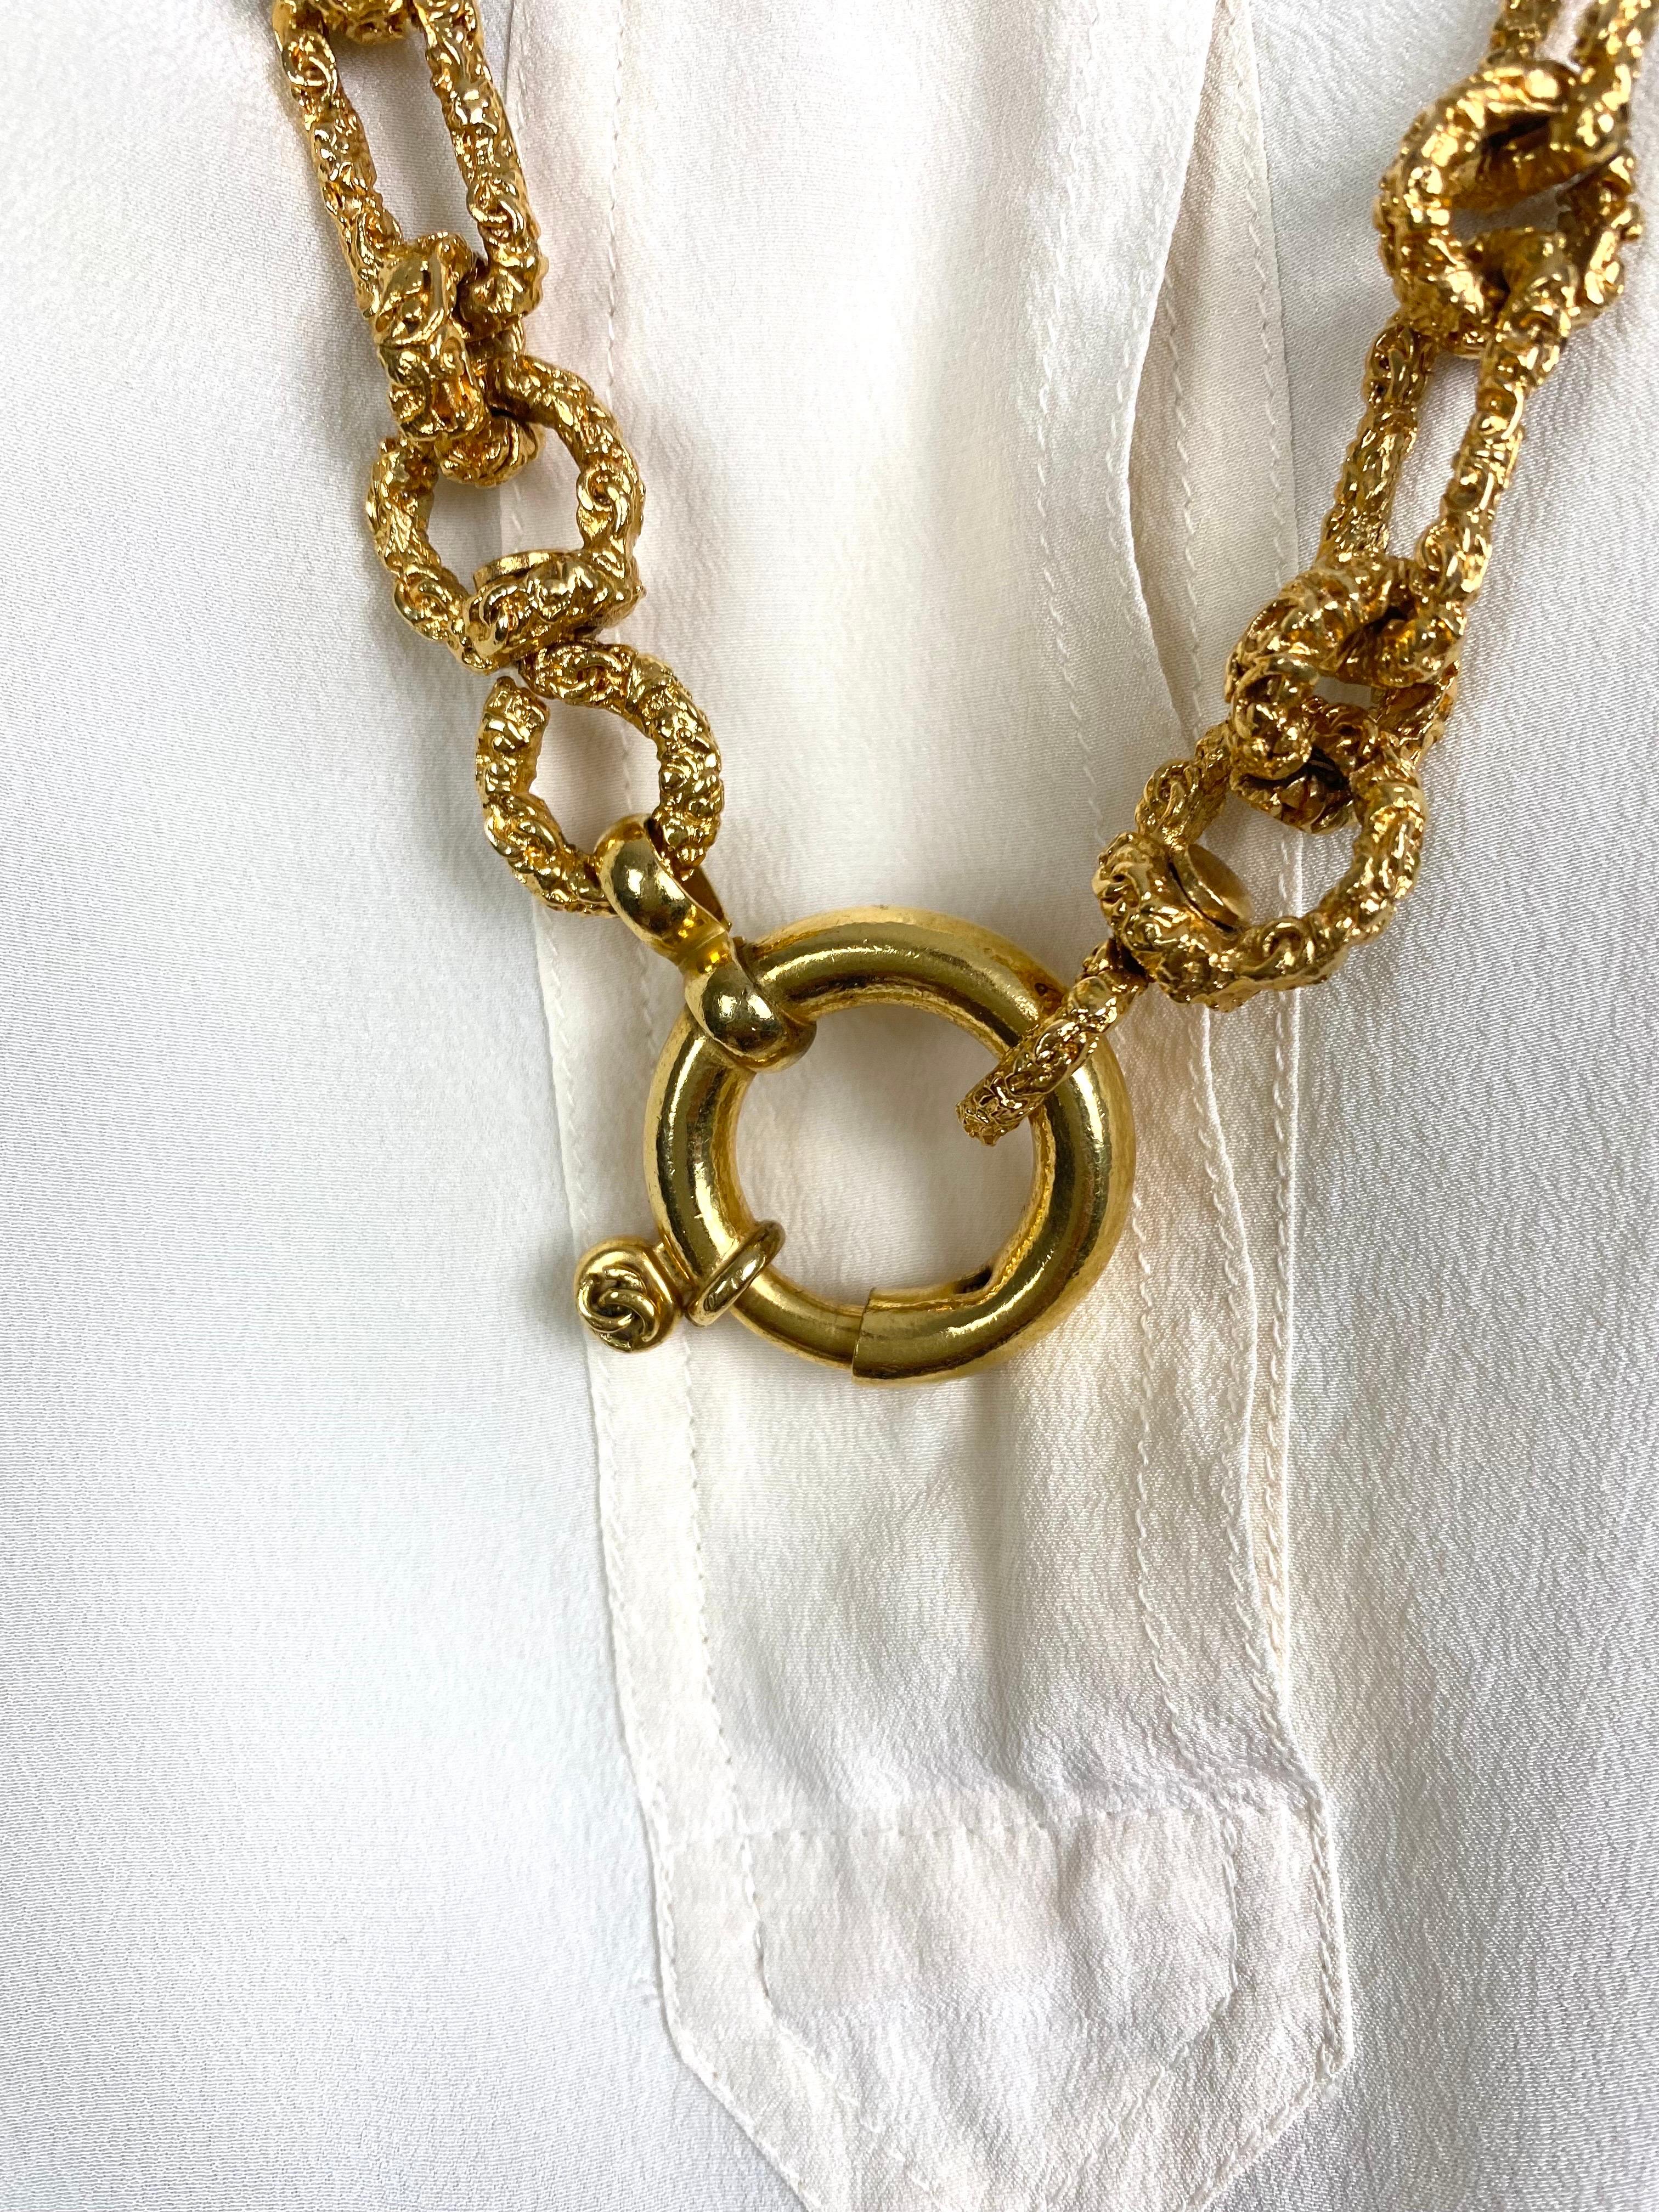 Vintage Chanel necklace from 1990 gold chain textured and intertwined CC pattern 4